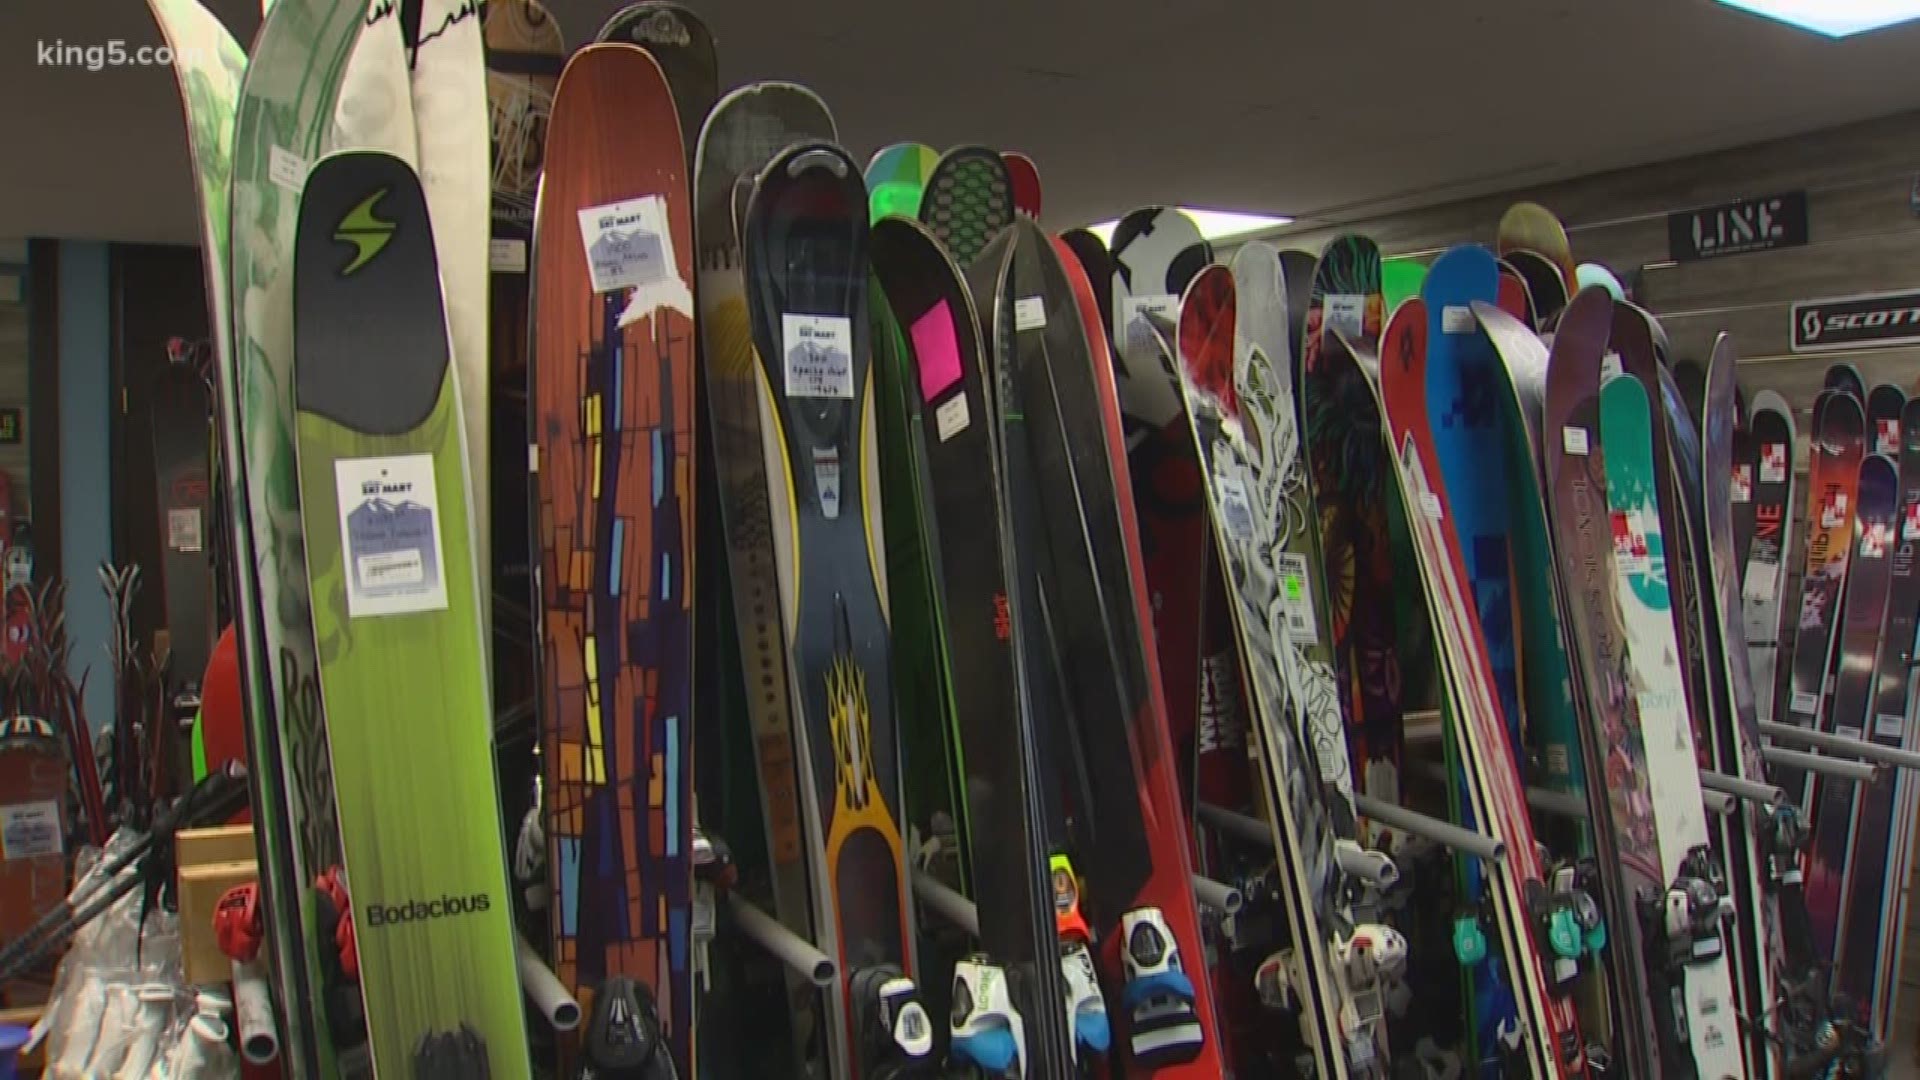 While some ski resorts are still waiting for enough snow to open, people are already gearing themselves up for the season ahead.